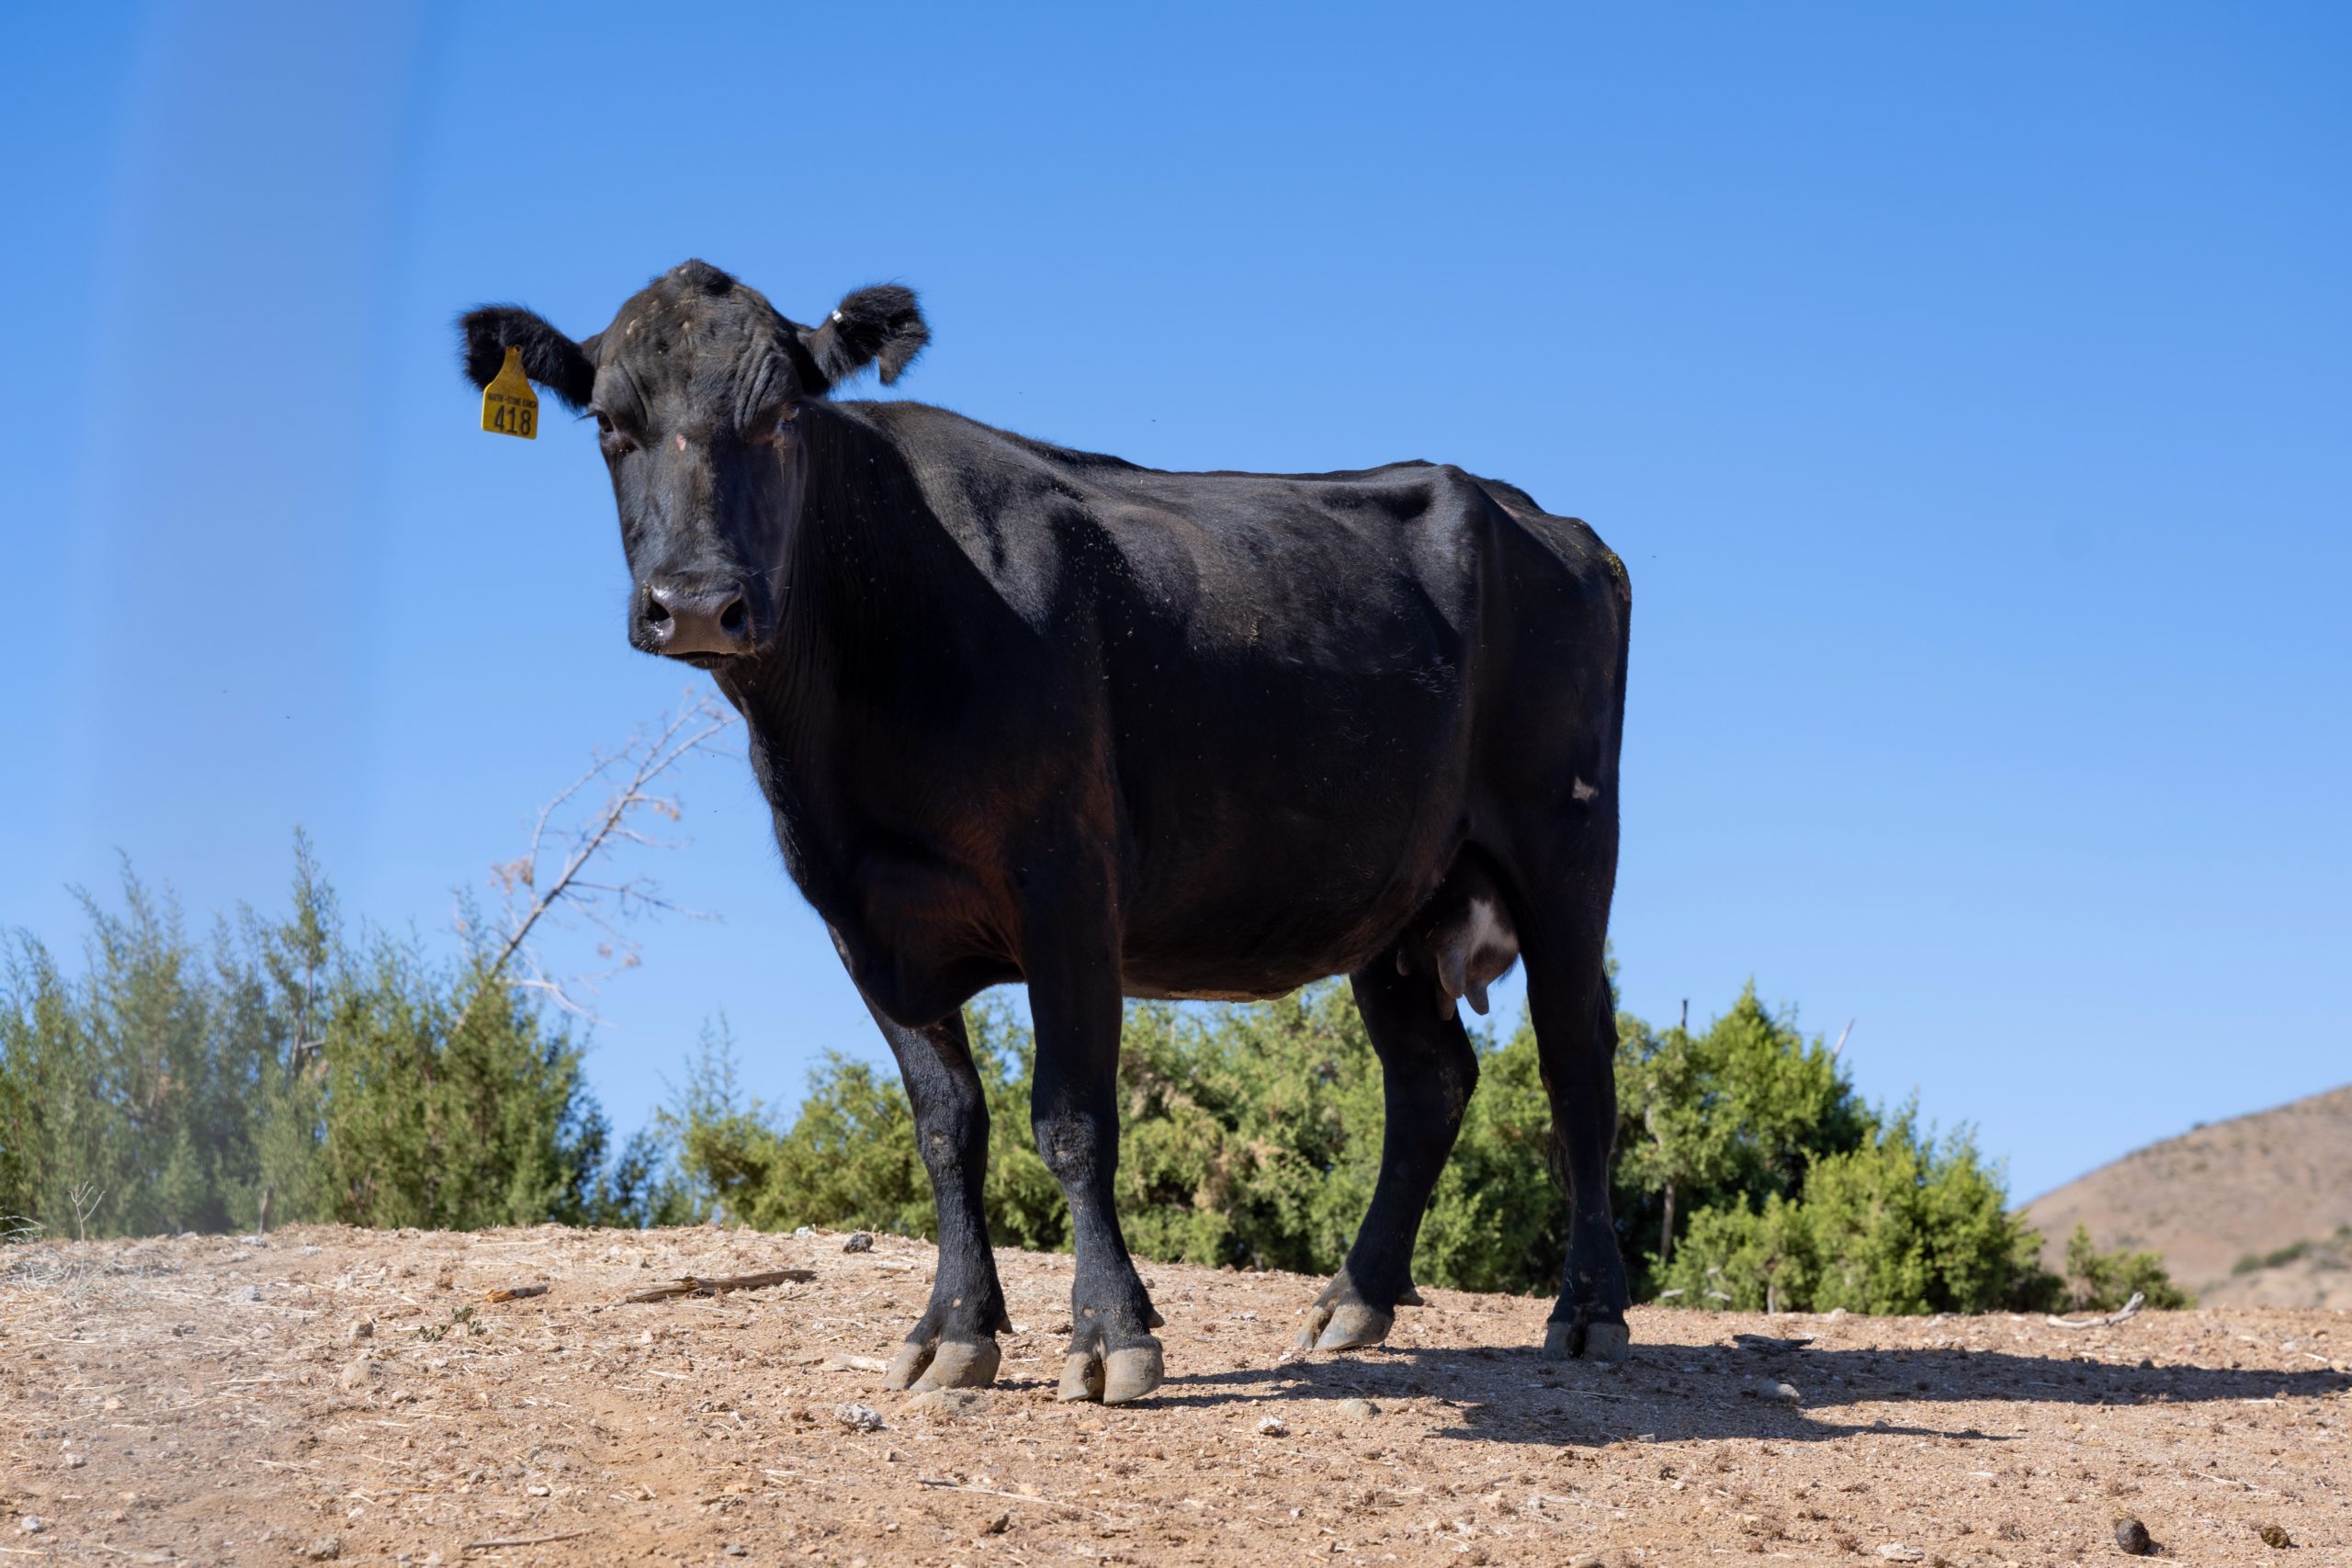 Only Surviving Cow That Escaped Slaughterhouse Arrives at New Home – NBC Los Angeles